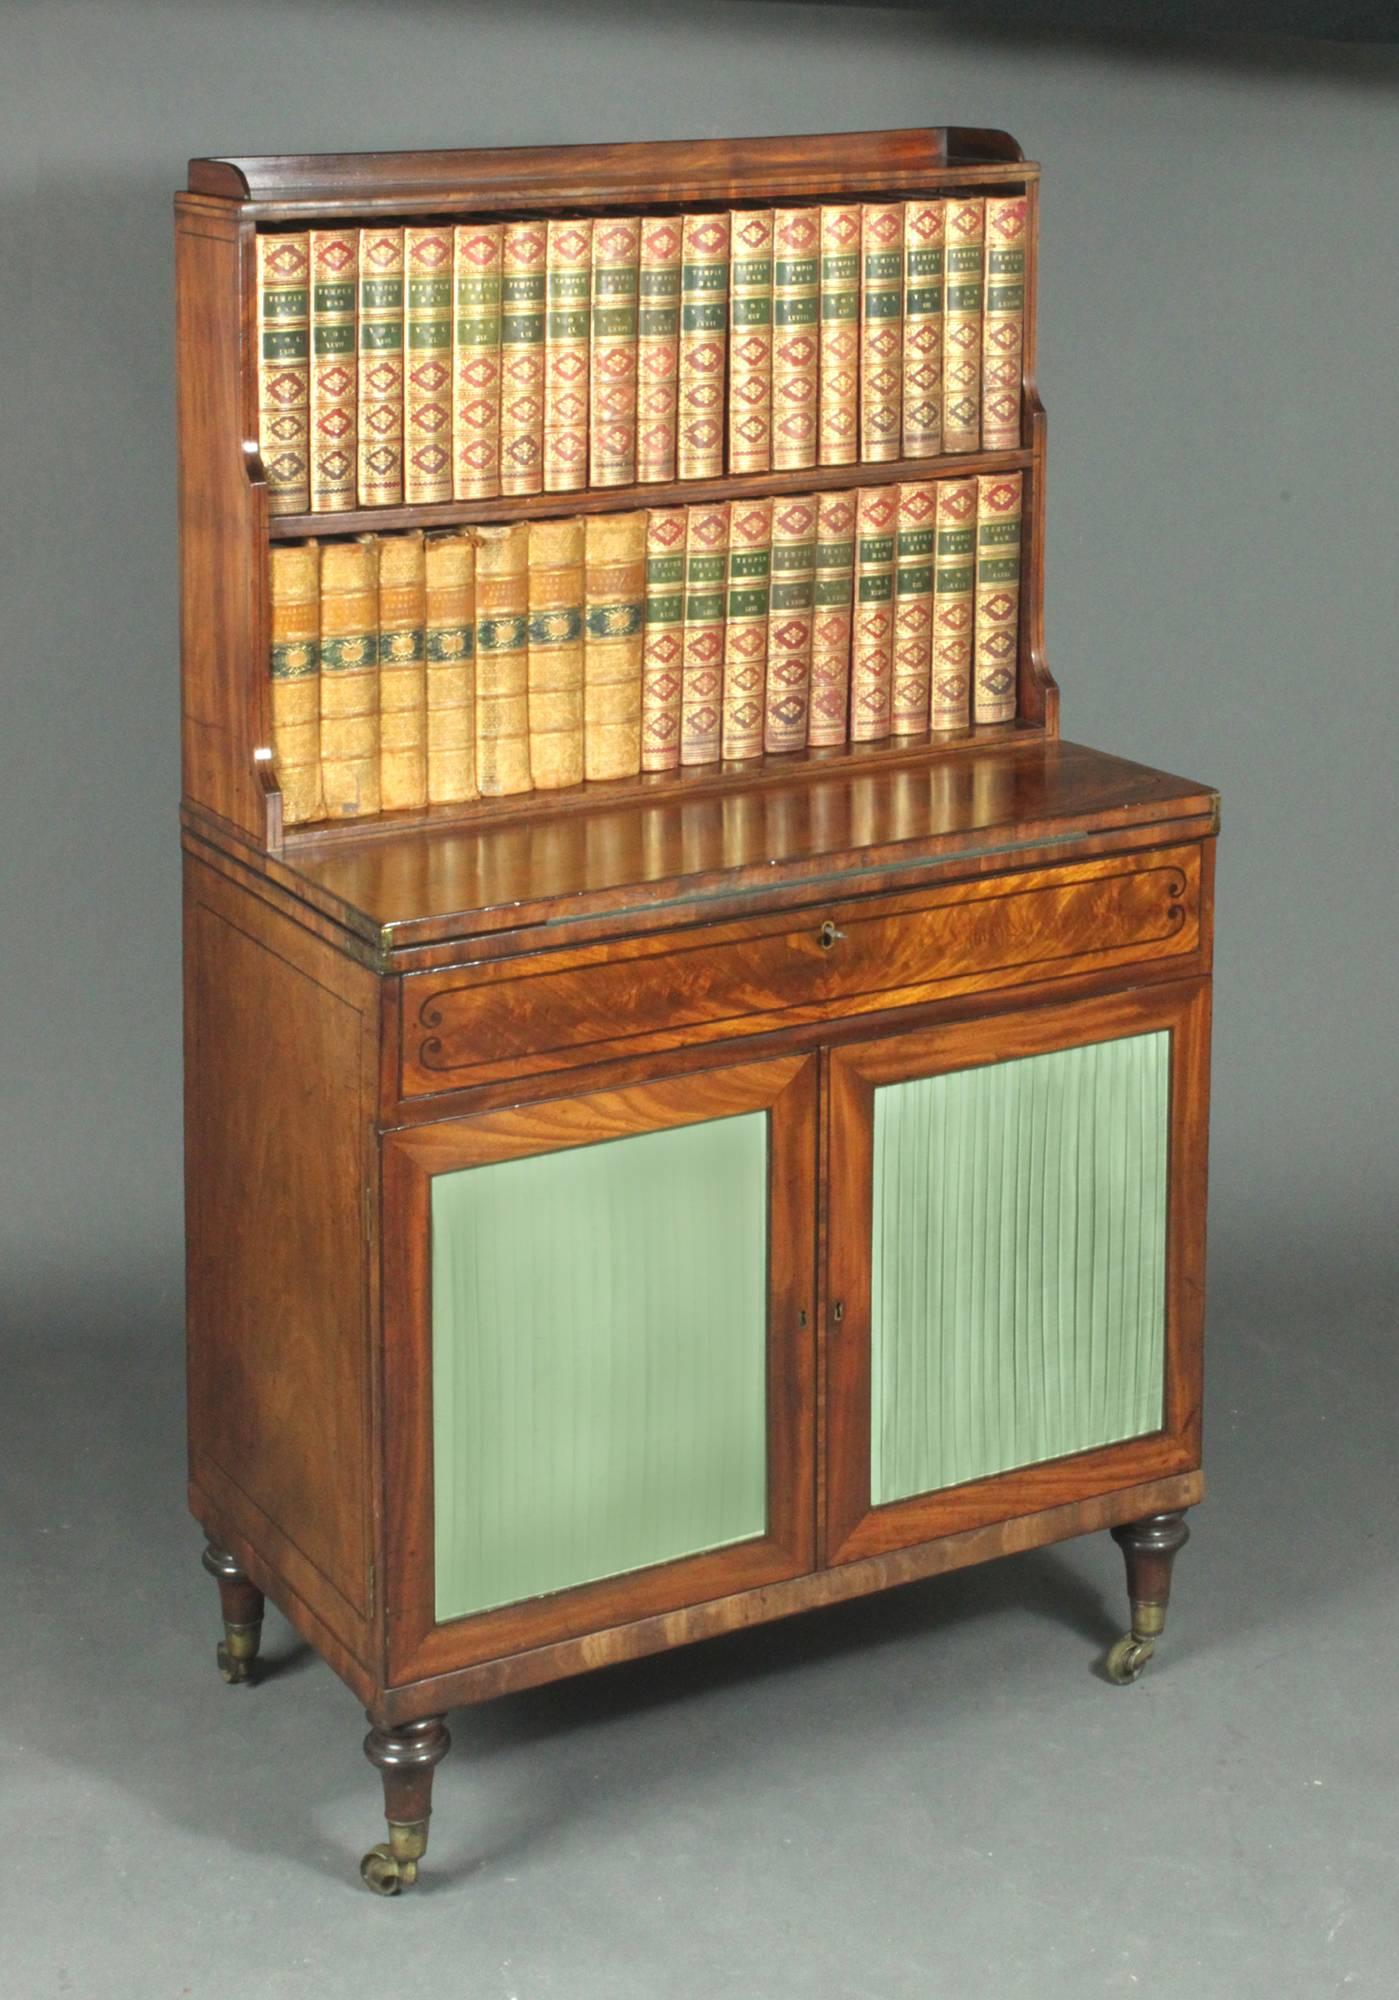 A fine Regency lady's writing cabinet in figured mahogany with black ebony inlay: Good colour and patina. Opening writing flap with lidded compartments for ink bottles and pens.

 